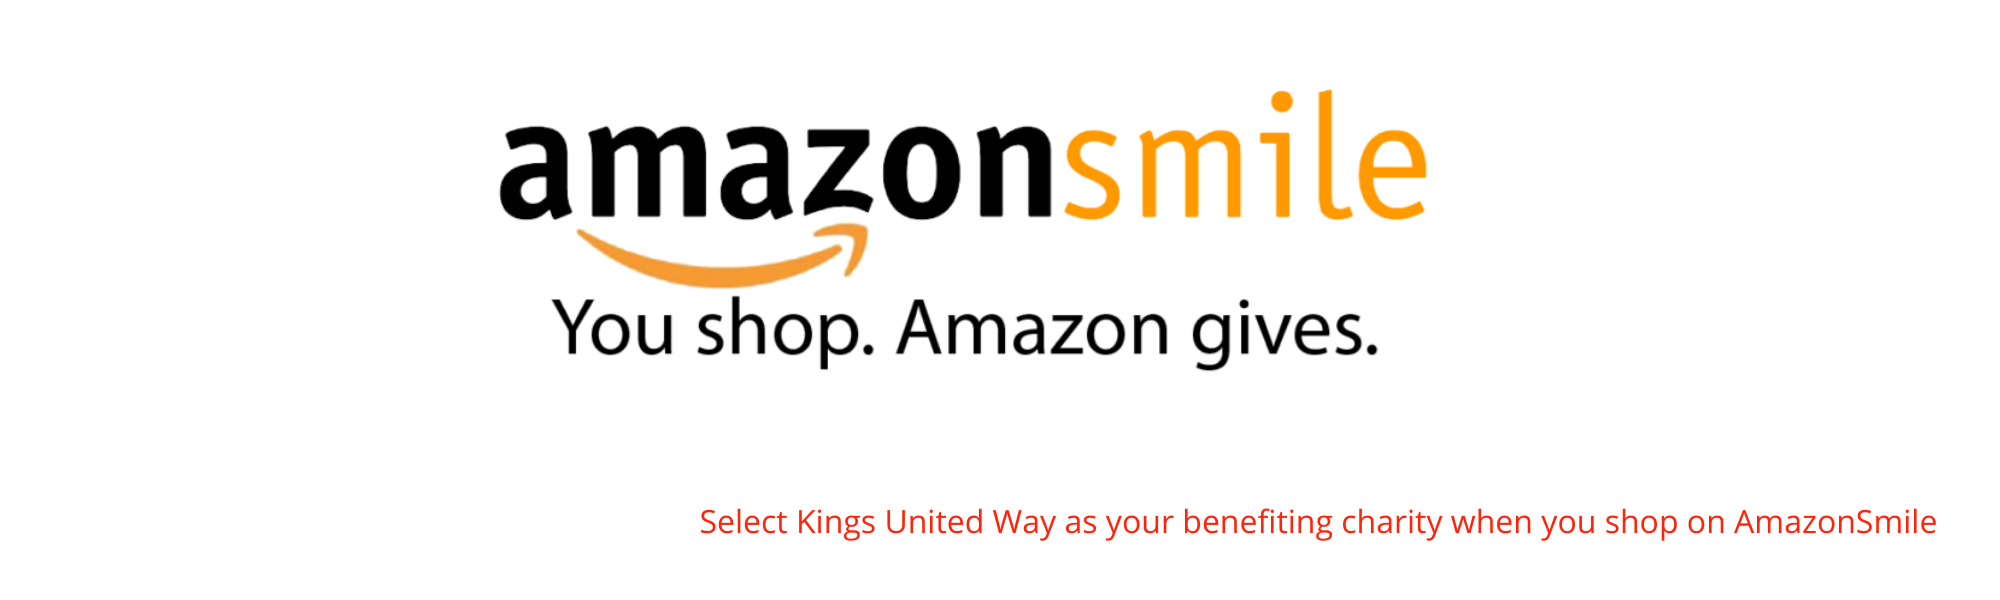 Select Kings United Way as your benefiting charity when you shop on AmazonSmile